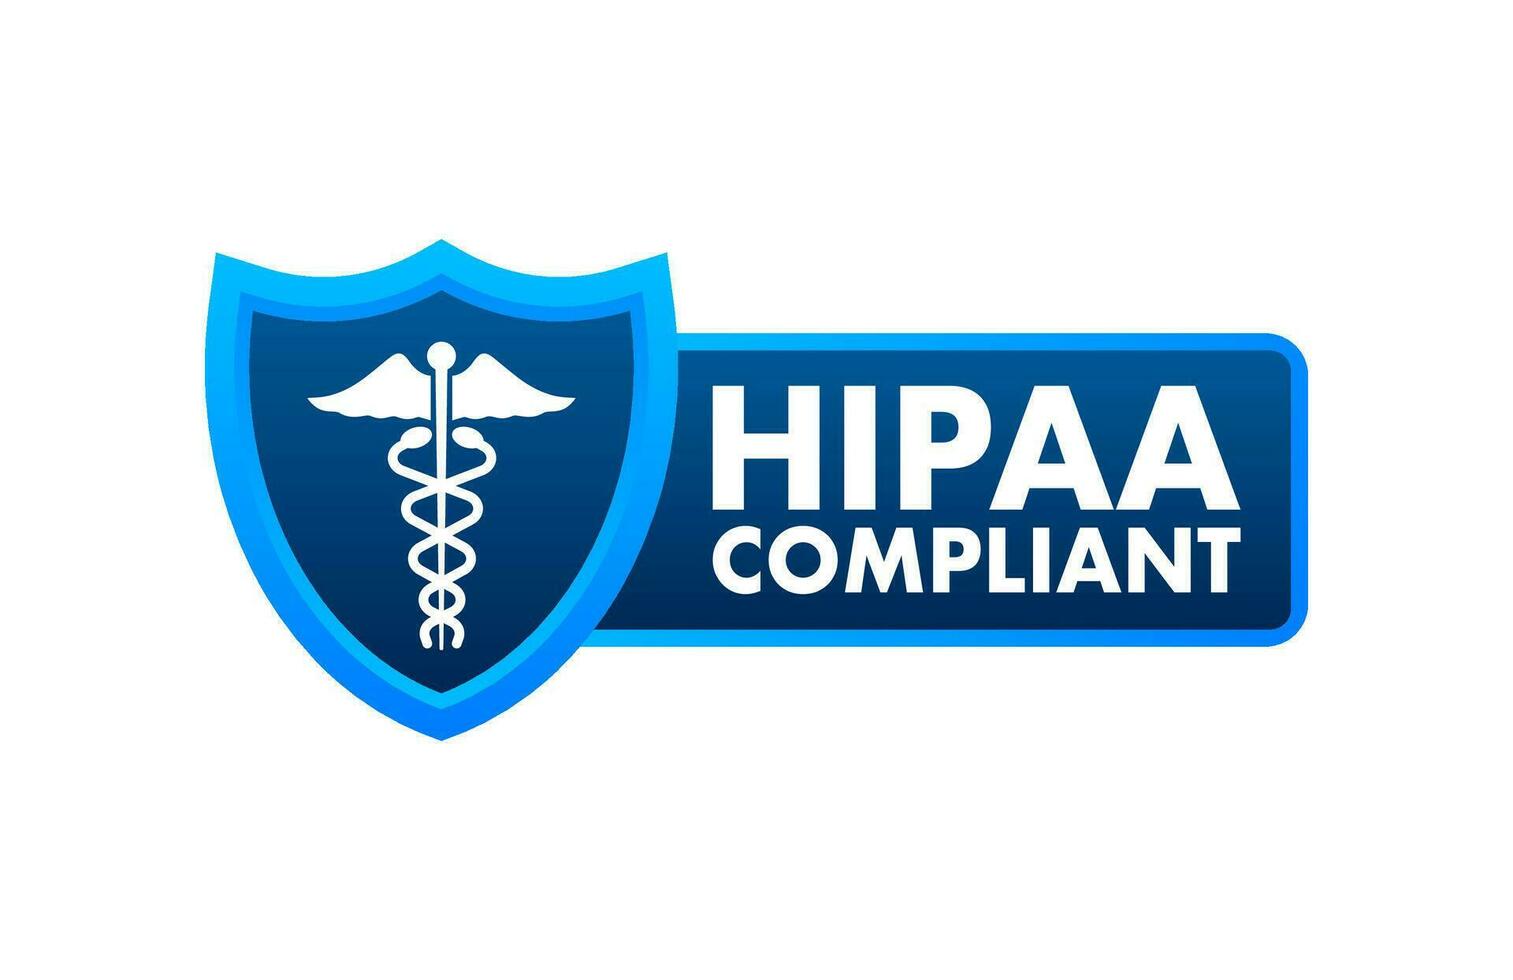 healthcare information compliance media platform concept build and managed by ICT Leaders HUB